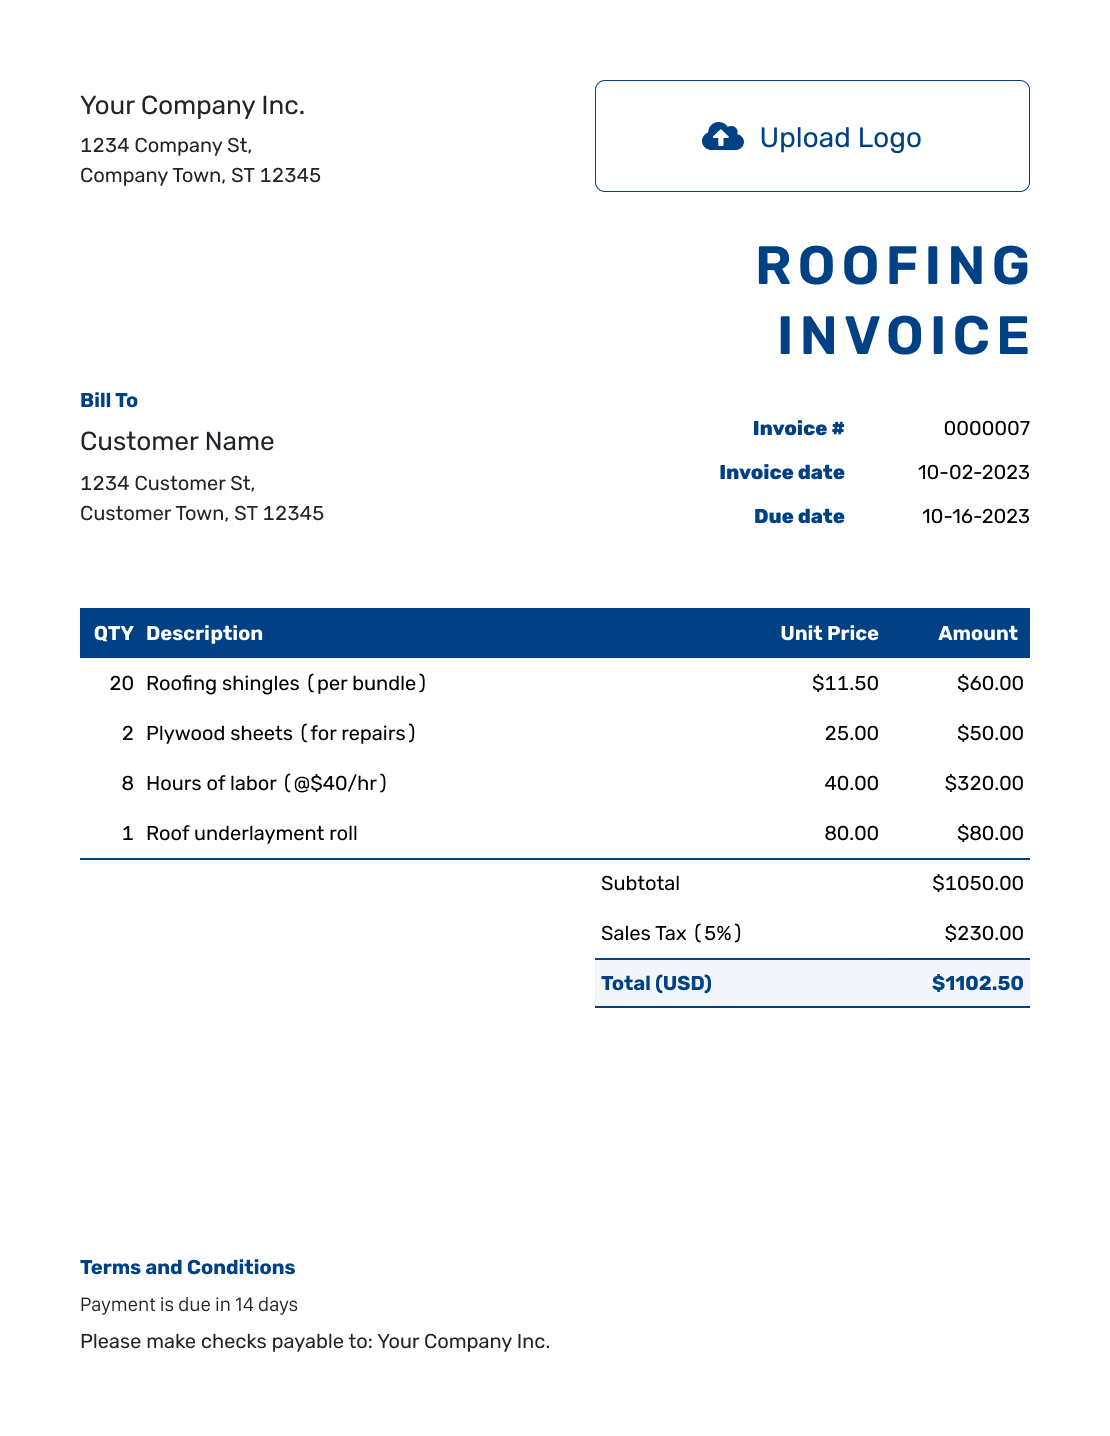 Sample Roofing Invoice Template